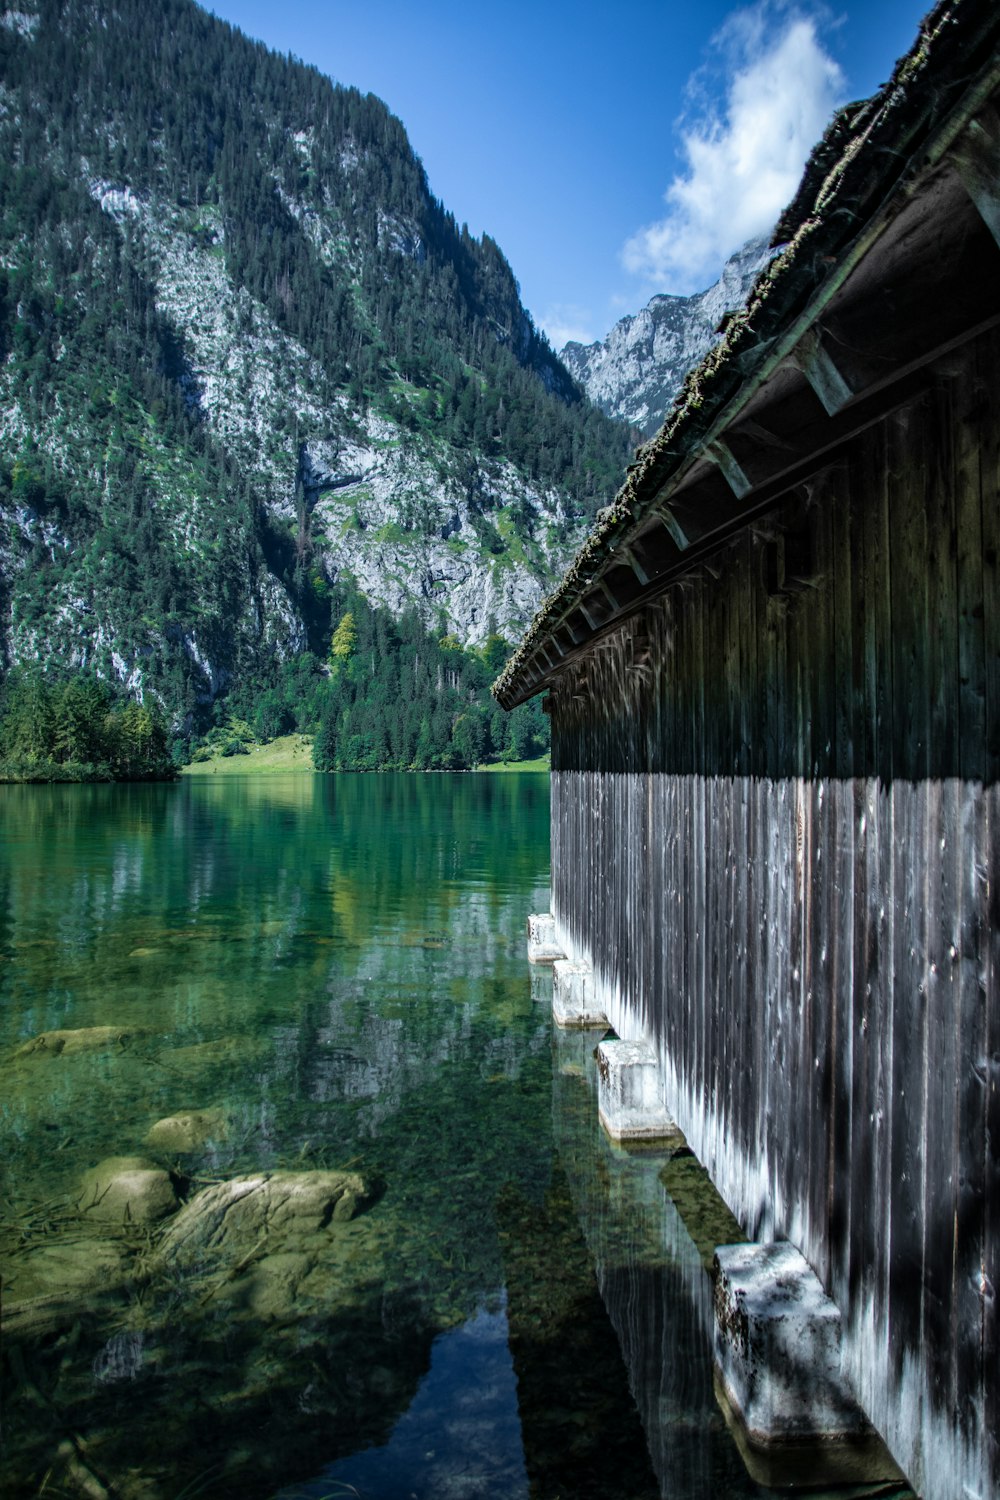 a wooden building next to a lake